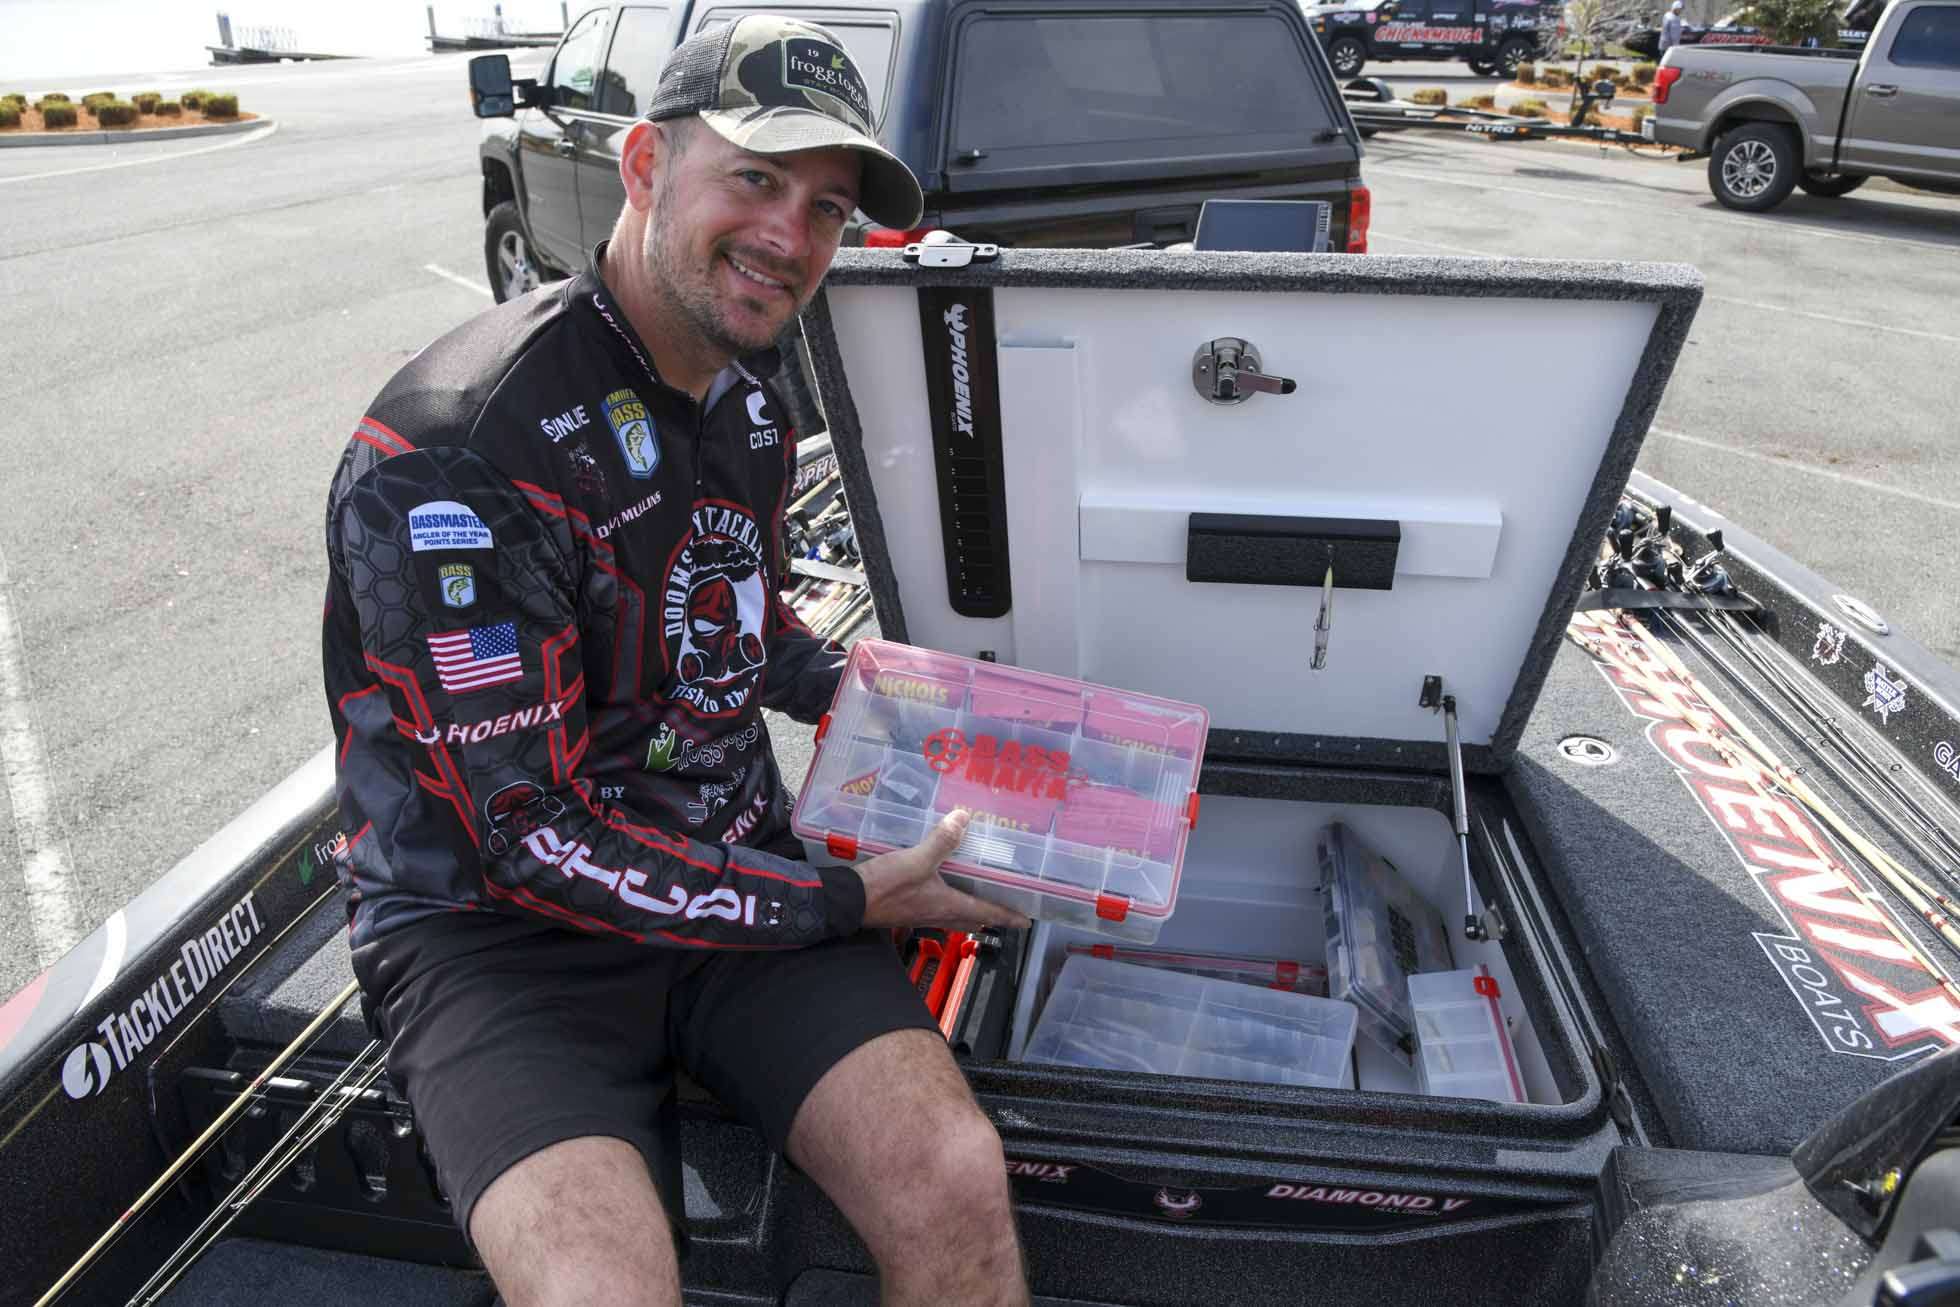 The rear center compartment is for tackle he knows heâll need during his day on the water. He keeps tackled stored in boxes so he doesnât have to hunt and peck for what he needs.